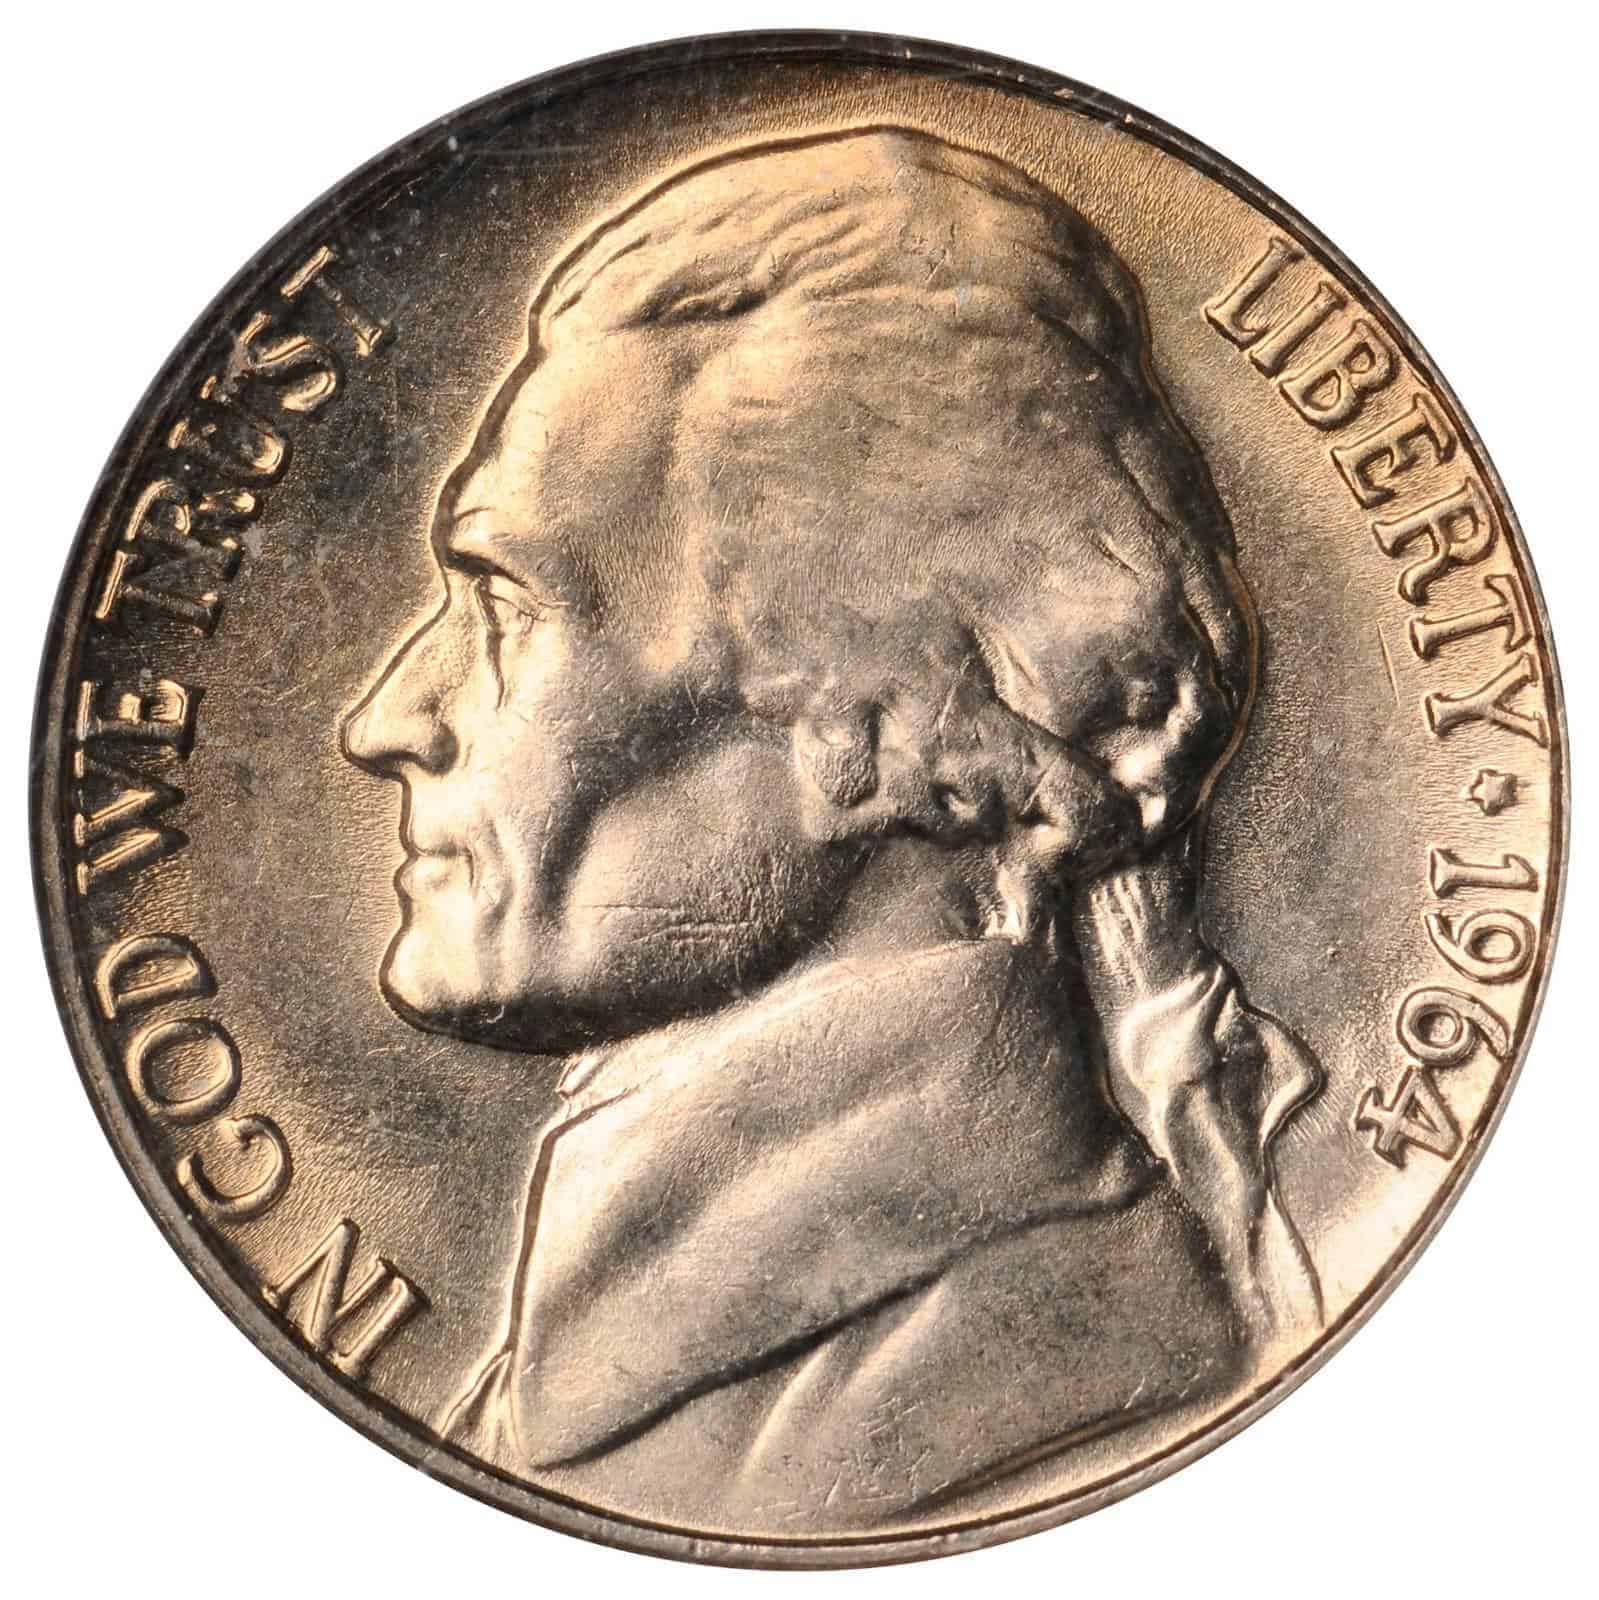 The Obverse of the 1964 Jefferson Nickel